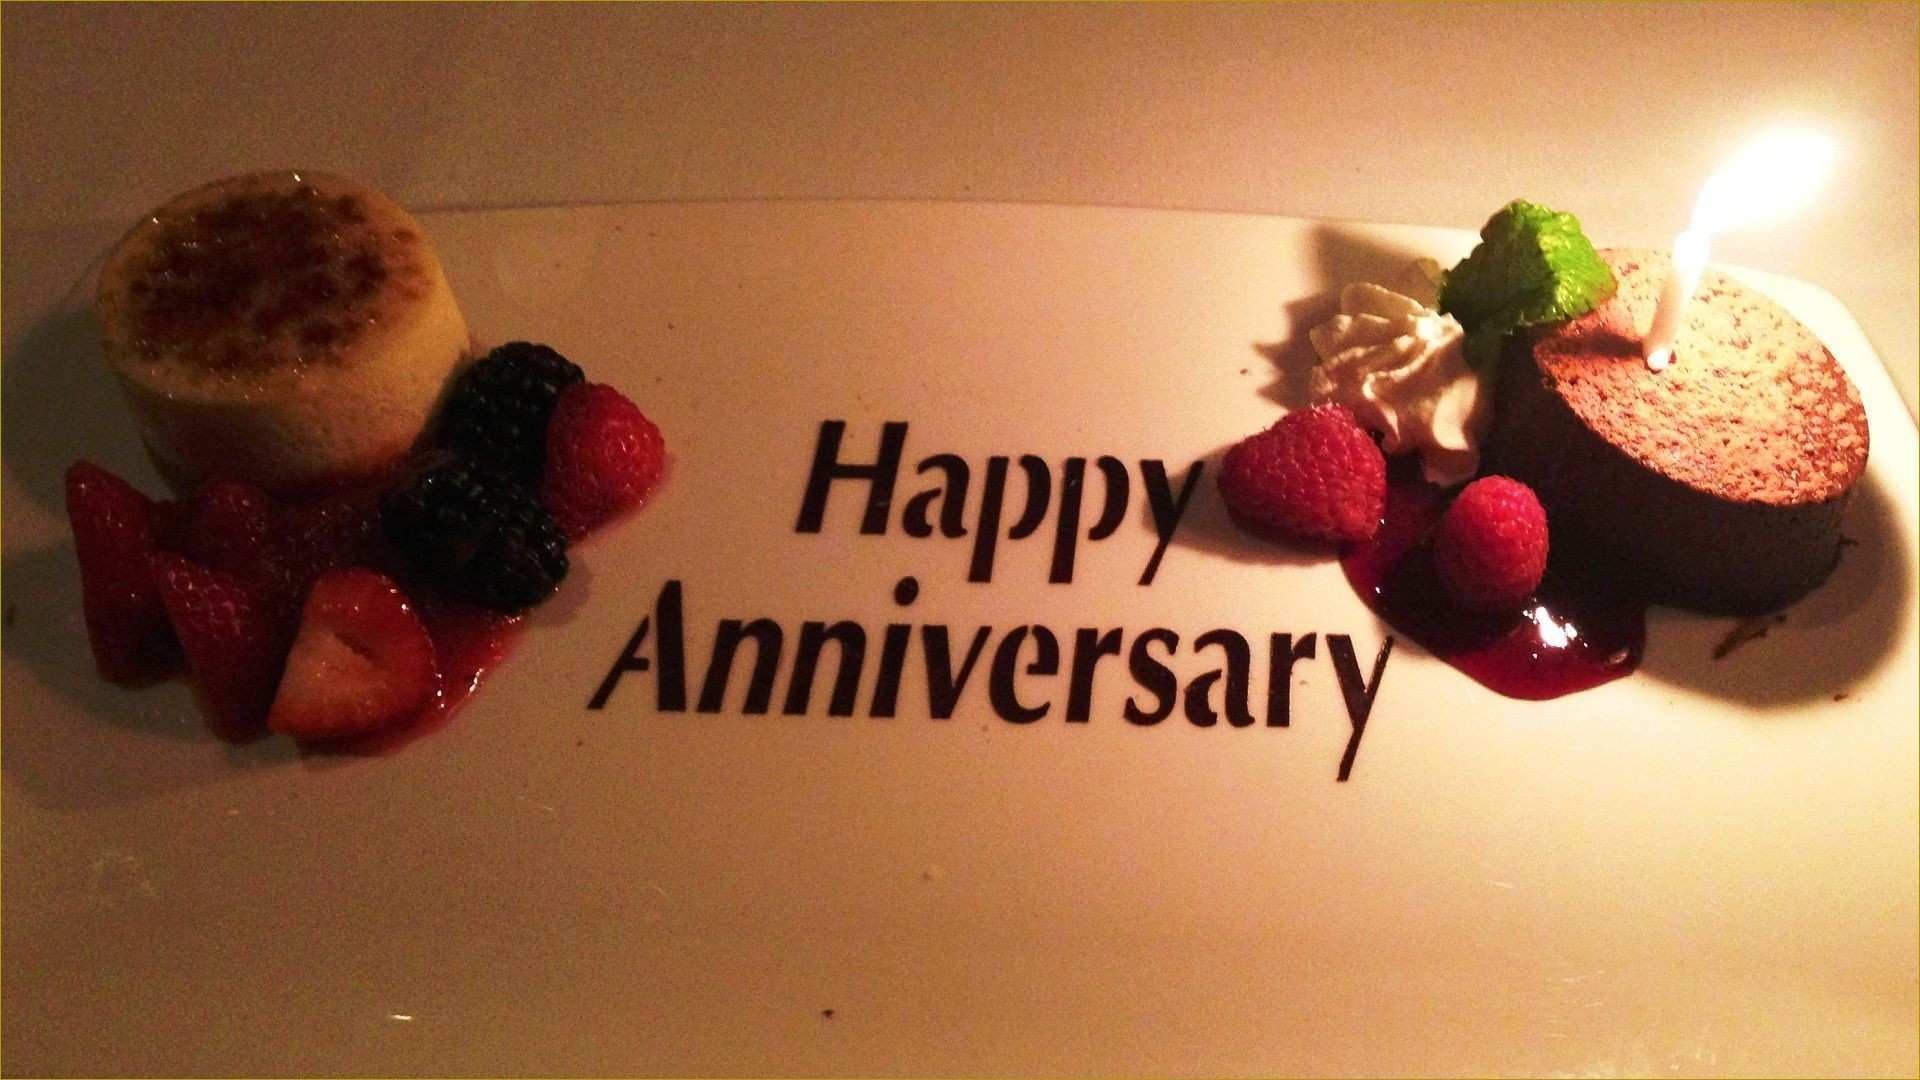 1920x1080 Happy Anniversary Cake Images Free Download Propose Happy Marriage  Anniversary Wallpapers Wallpaper Cave